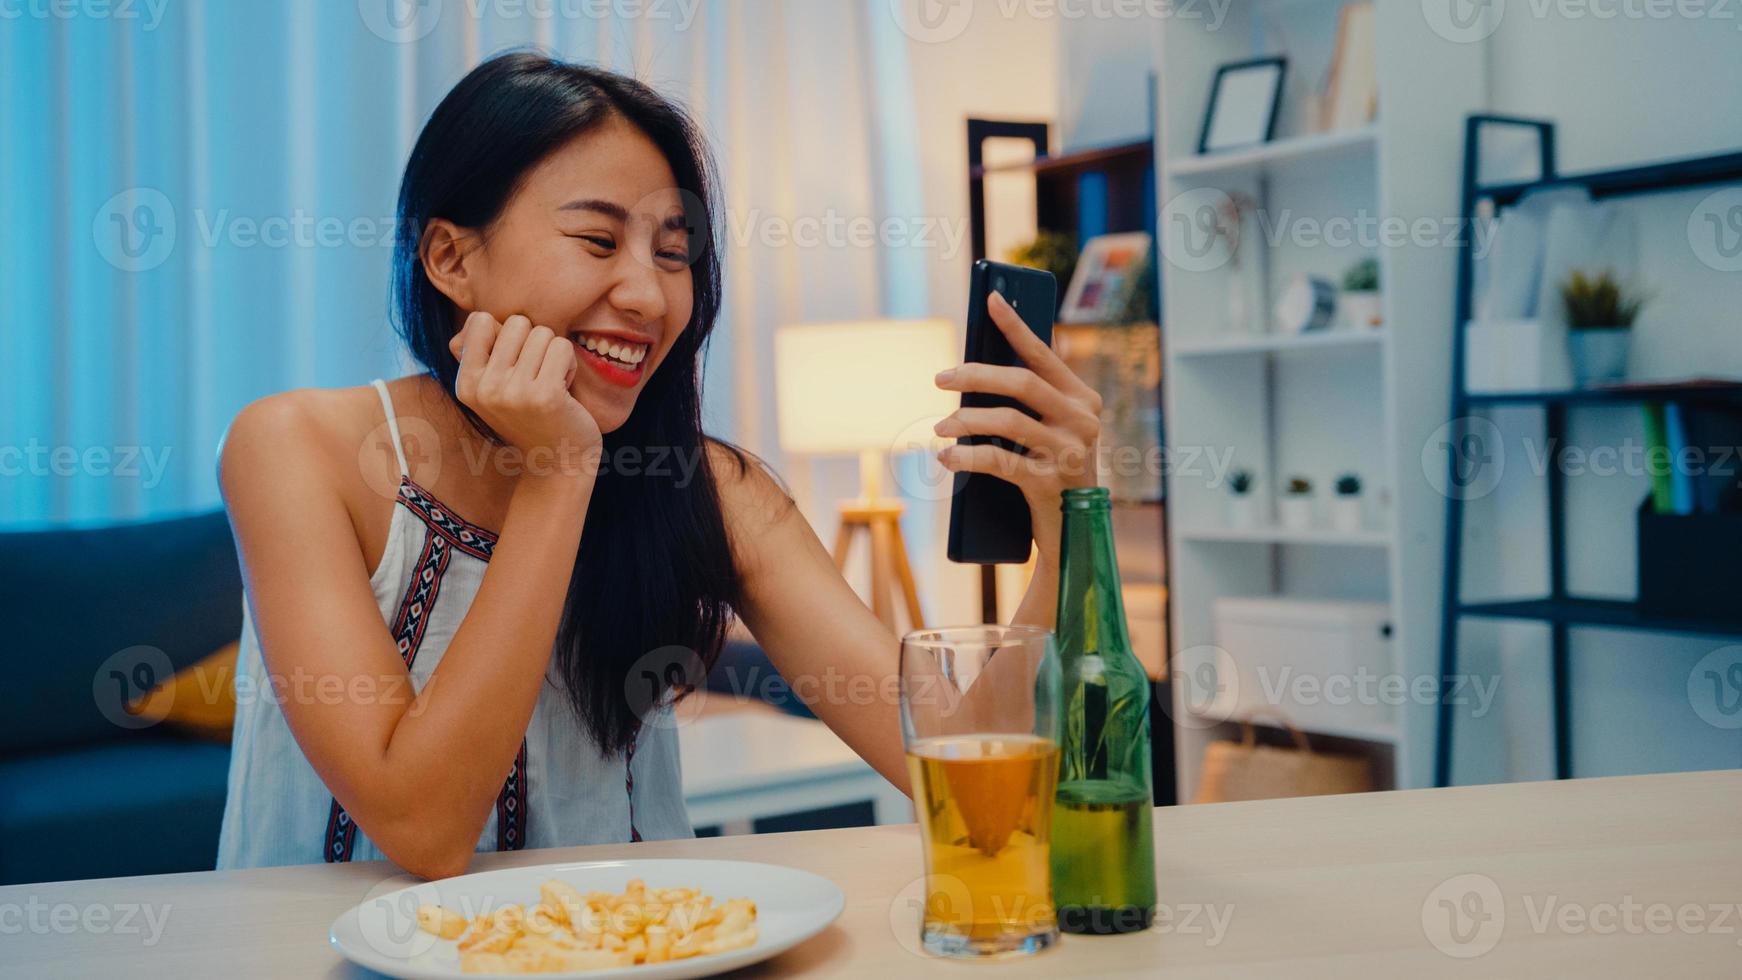 Young Asia lady drinking beer having fun happy moment night party New Year event online celebration via video call by phone at home at night. Social distancing, quarantine for coronavirus prevention. photo